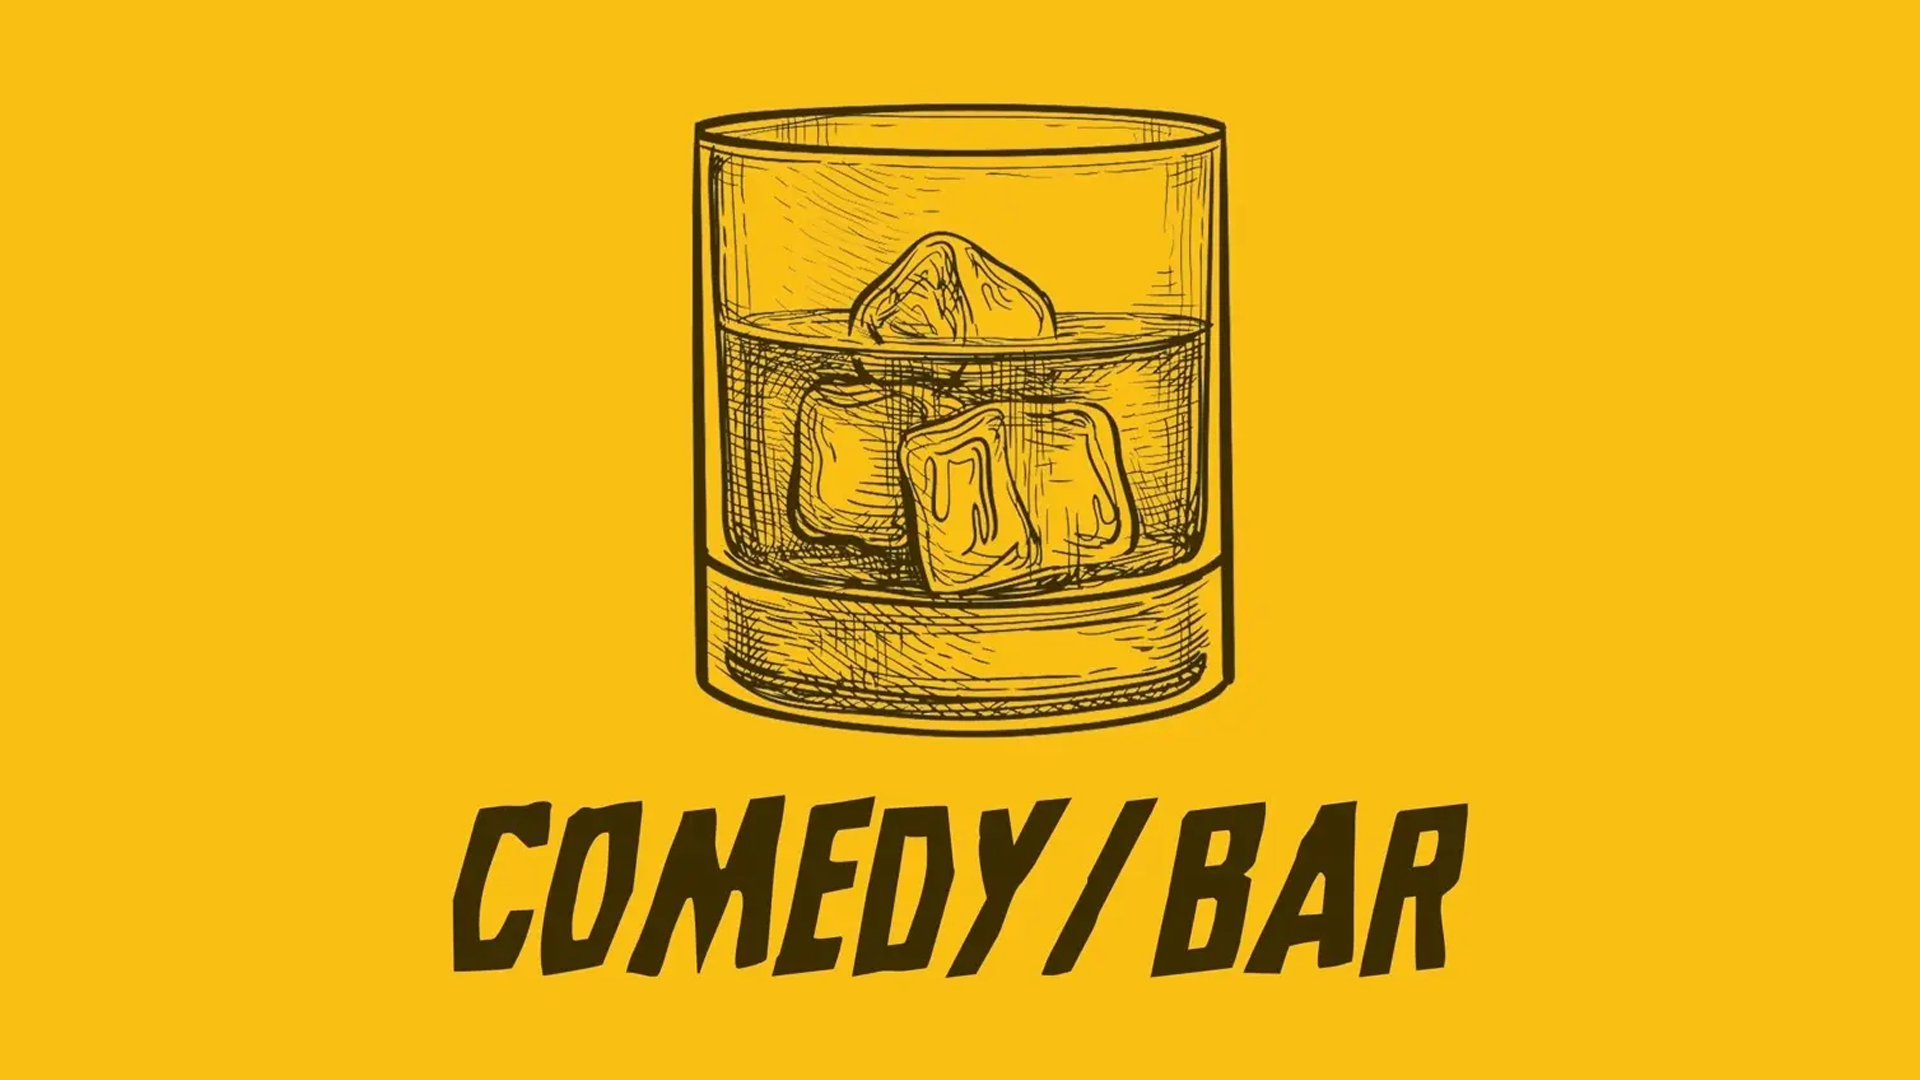 A logo for Comedy/Bar in Capitol Hill, Seattle.